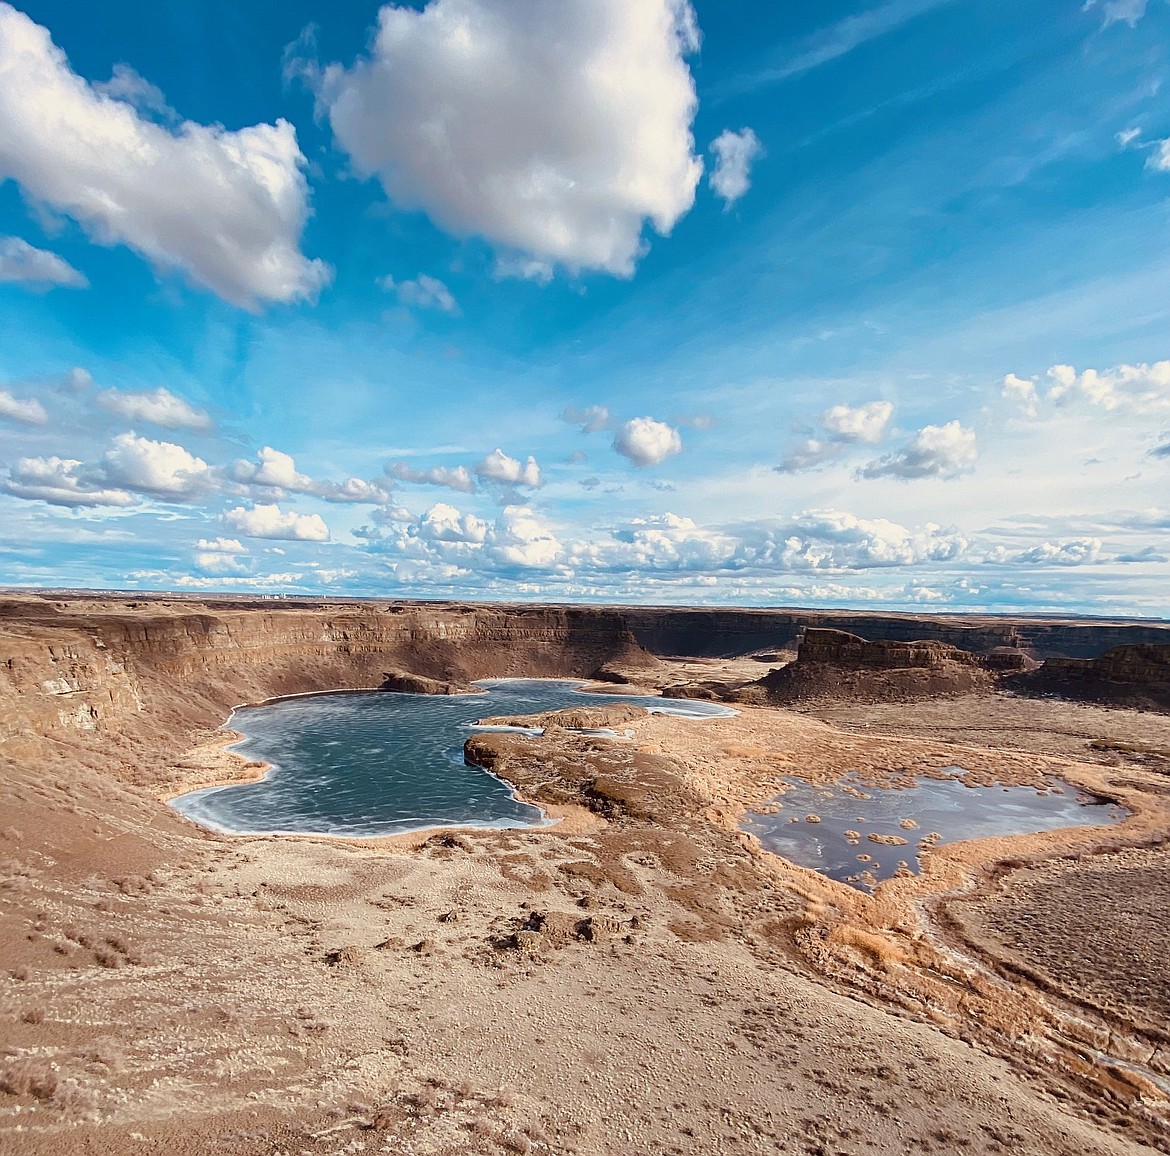 Dry Falls Lake, which Dave Graybill describes as “a spectacular place to fish,” especially for fly fishermen, where the rainbow, brown and tiger trout abound.